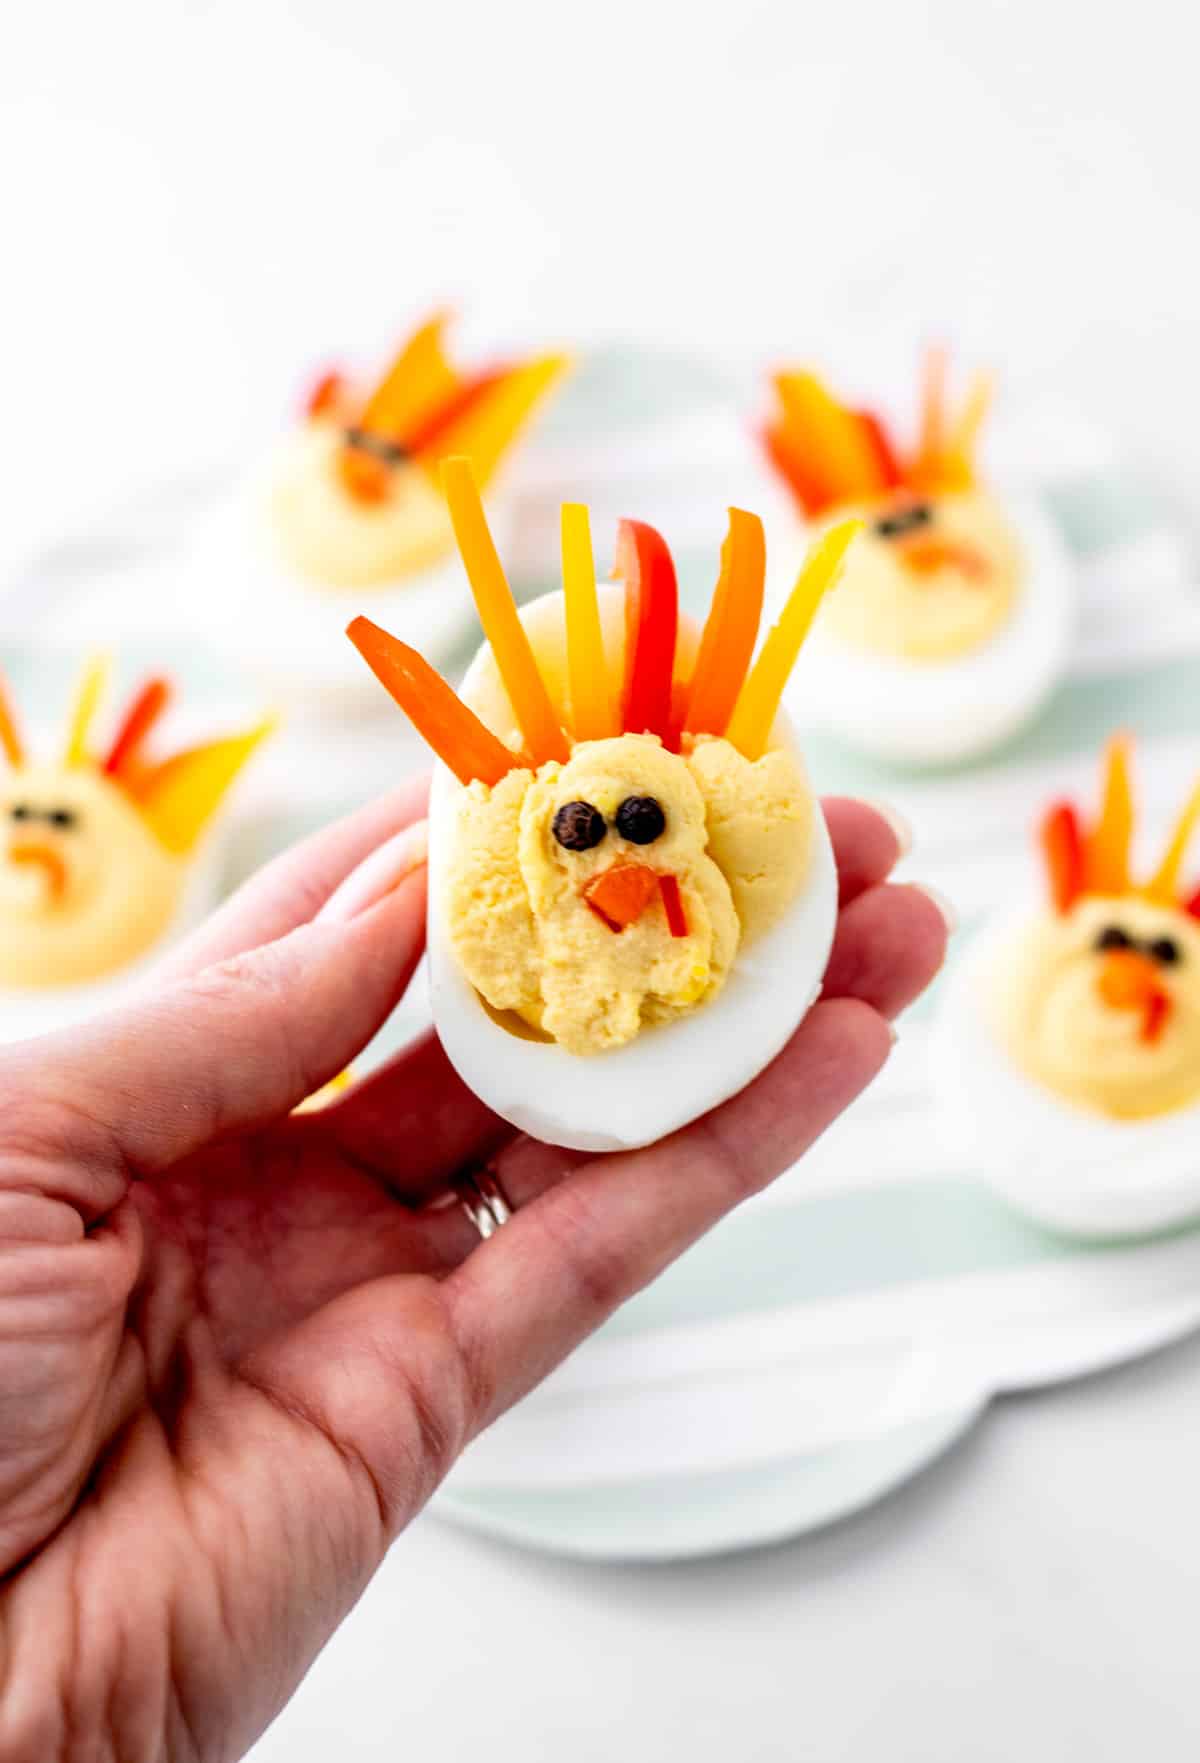 A hand holding up a turkey shaped deviled egg.